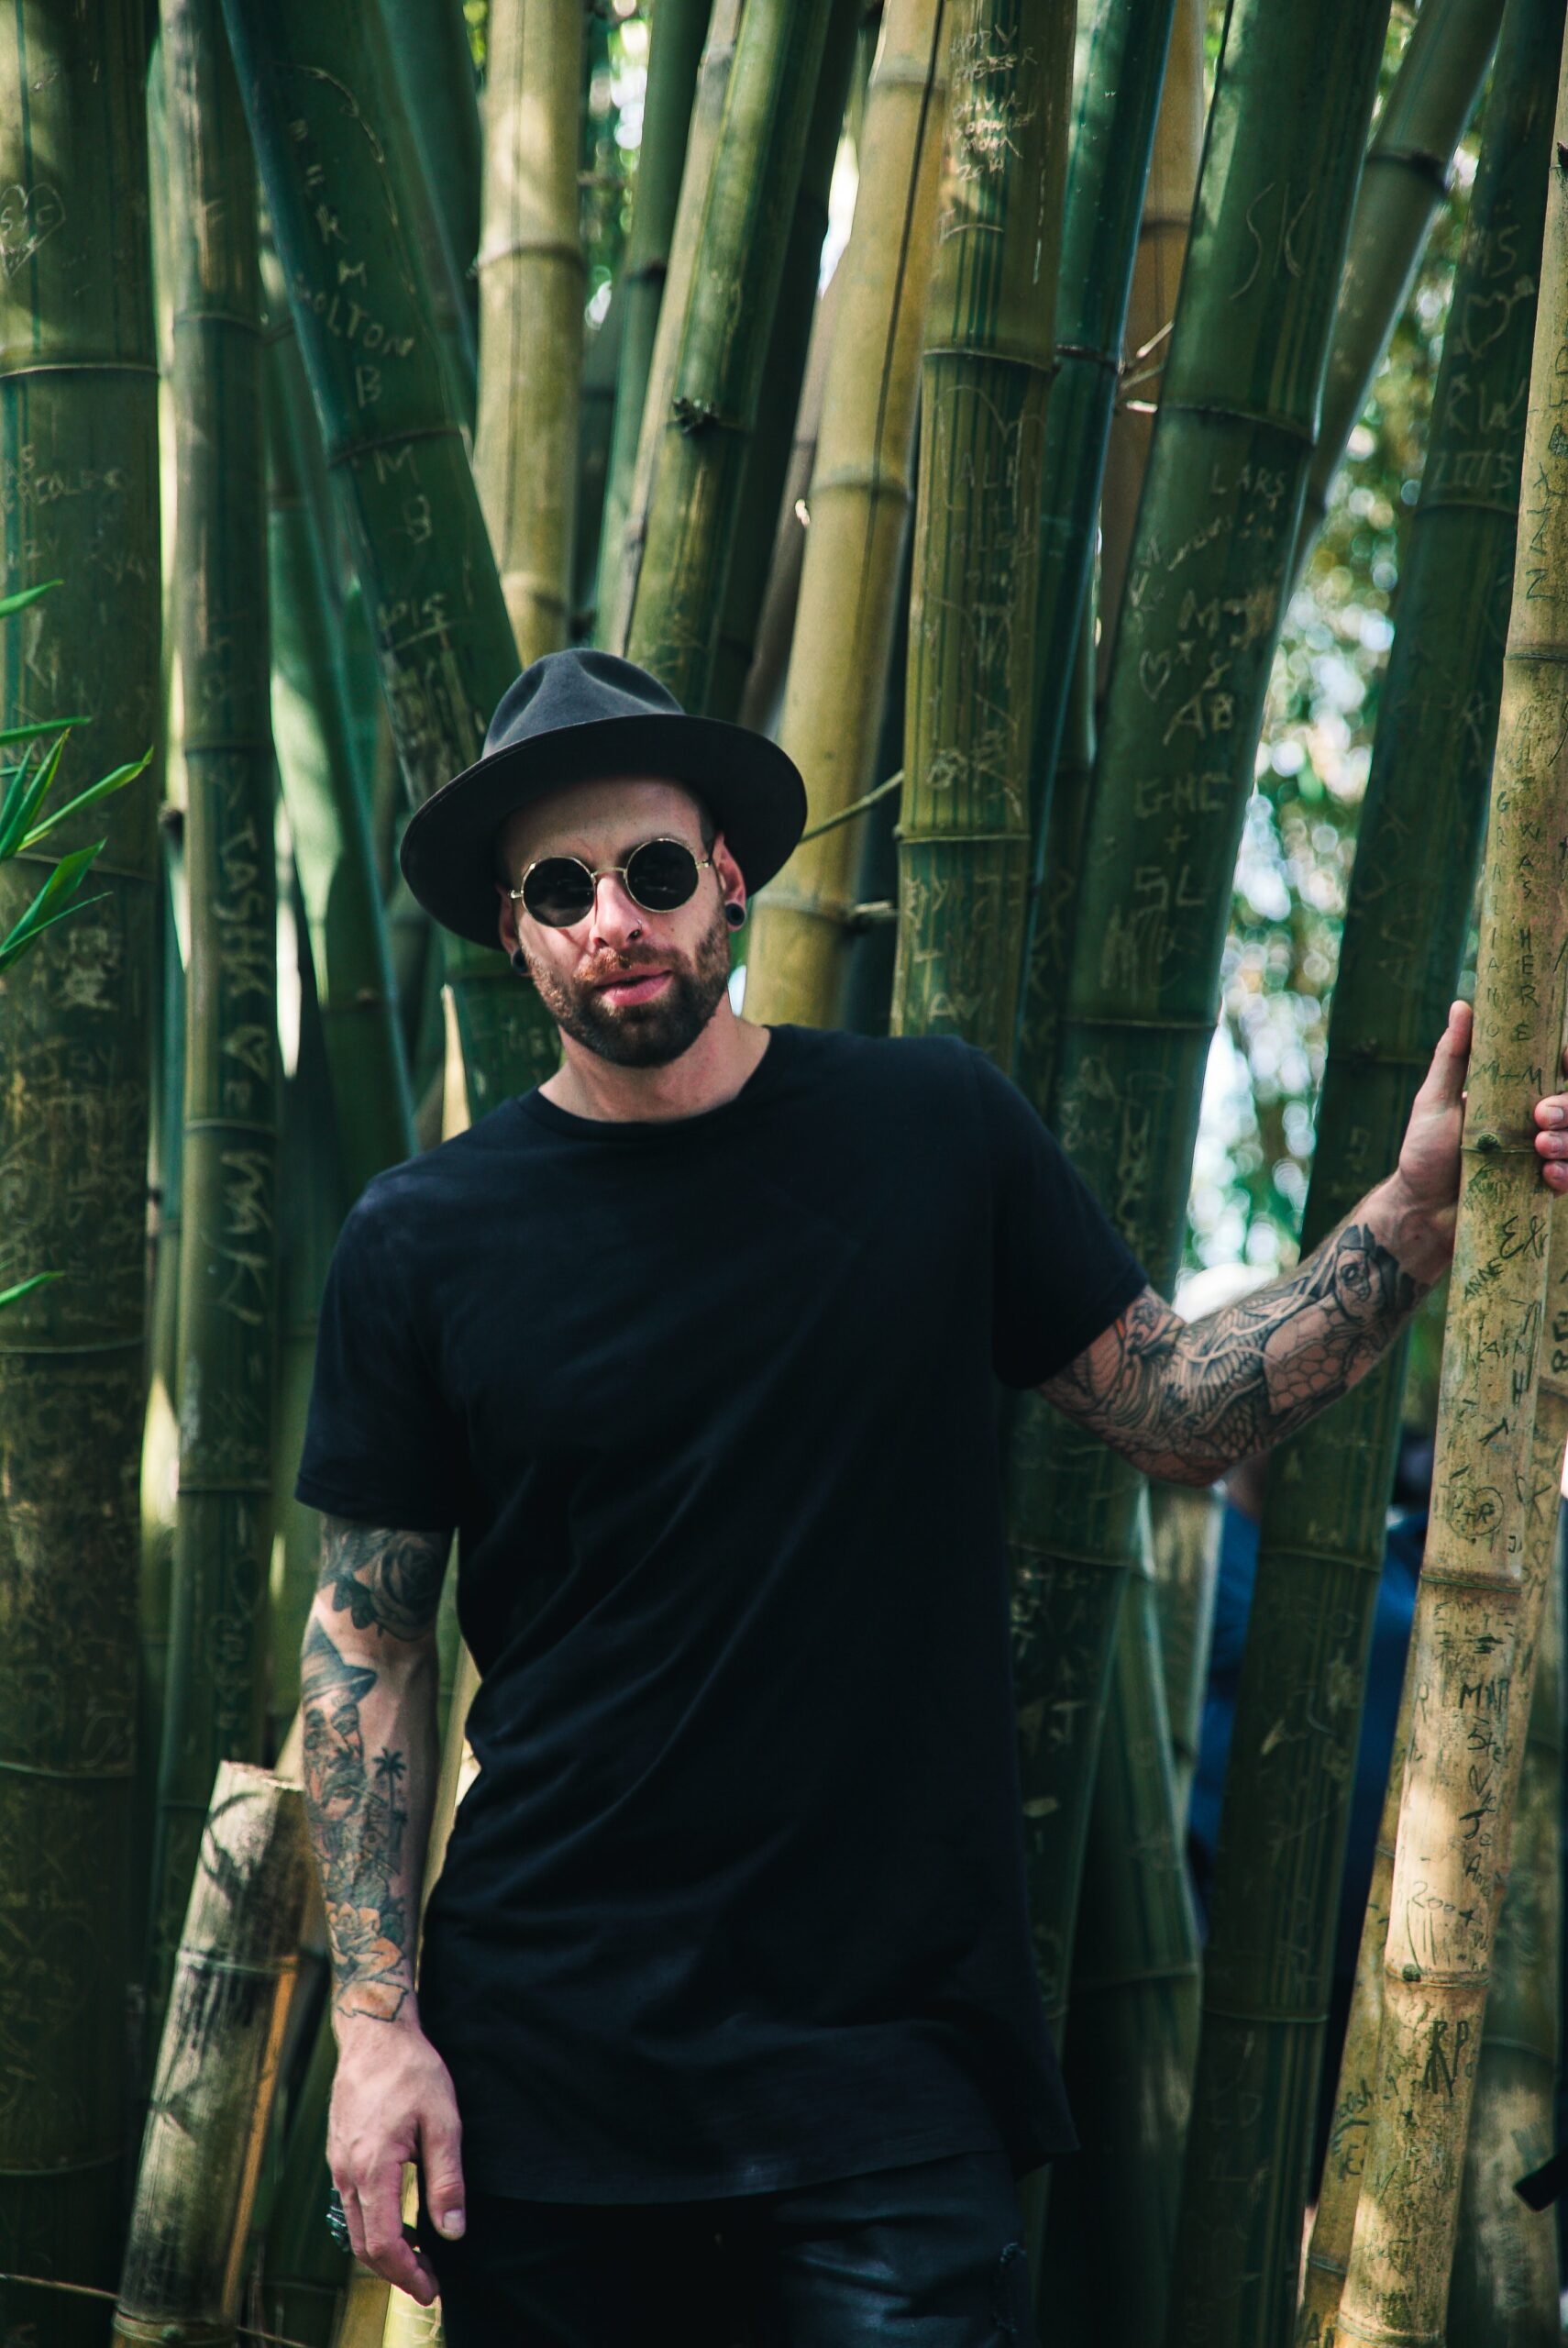 Man in all black with bucket hat wearing black sunglasses standing in the woods with full arm tattoos.